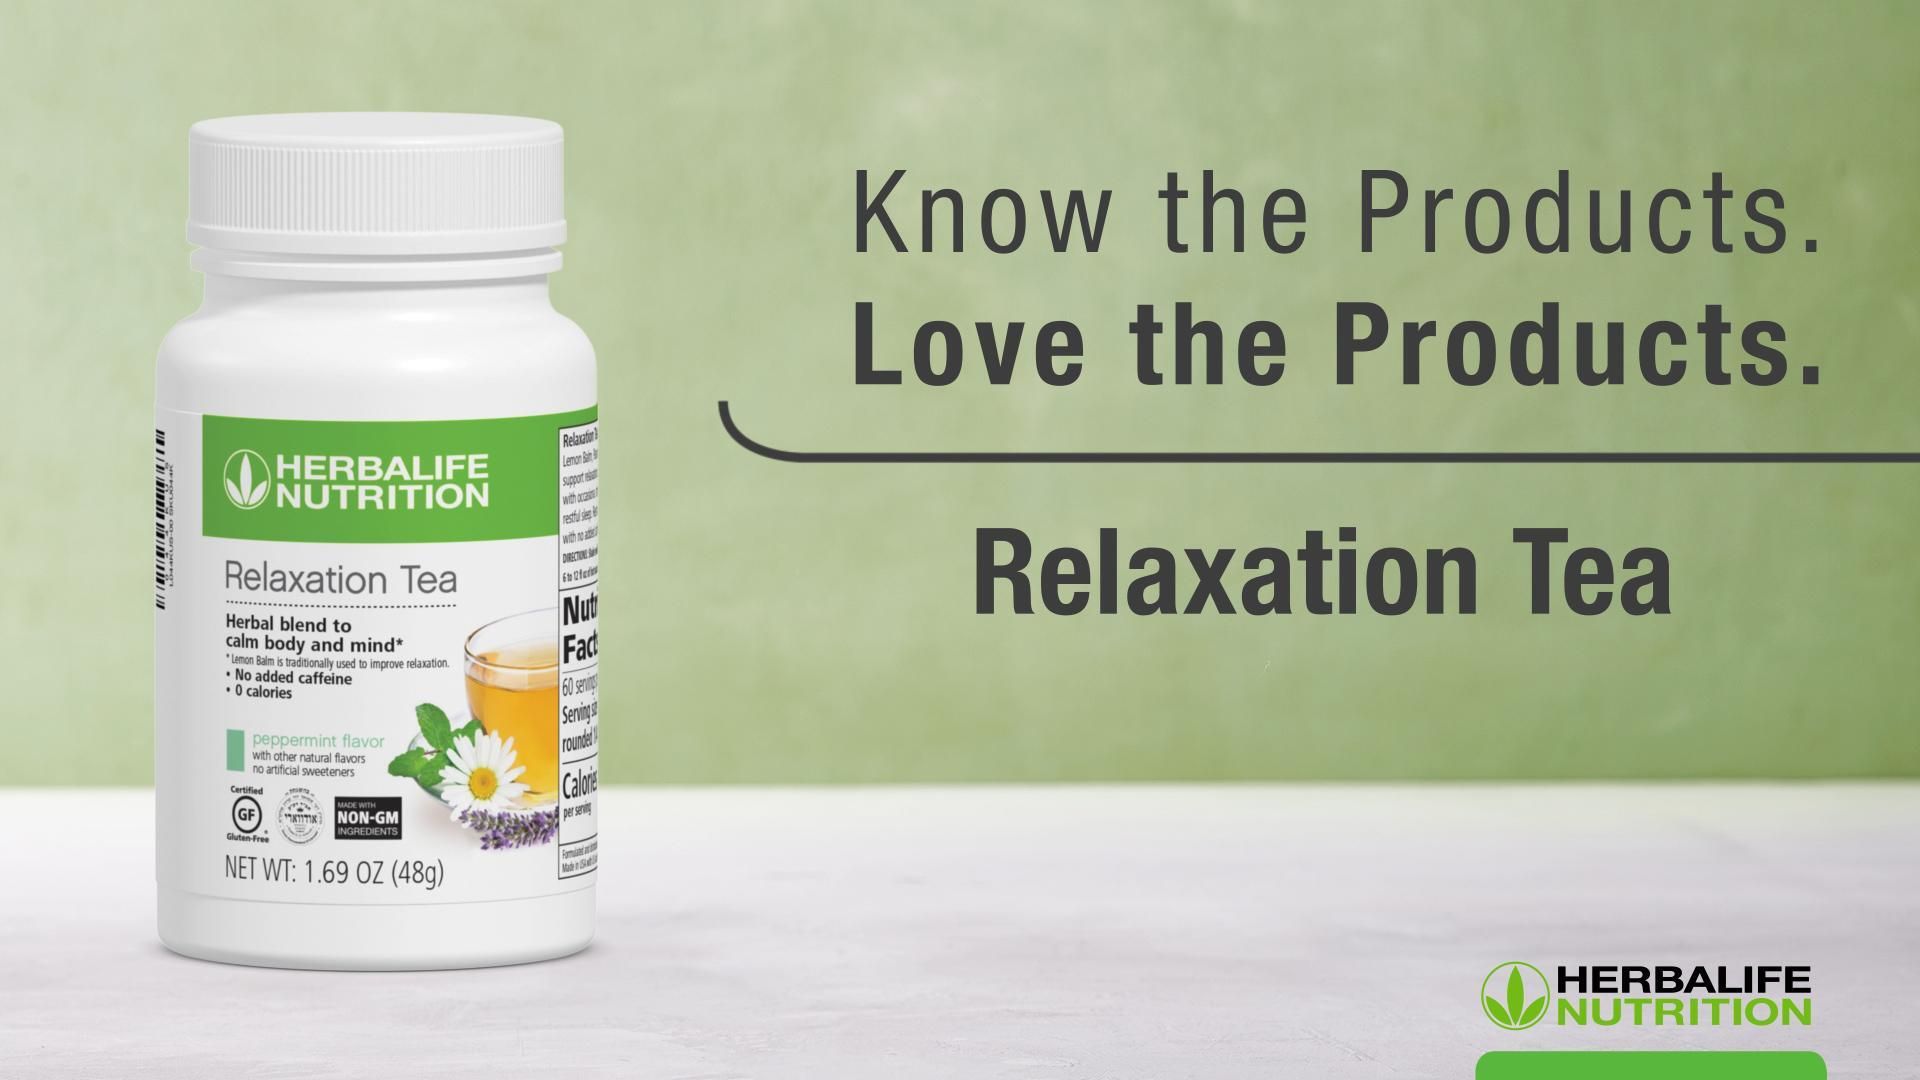 Relaxation Tea: Know the Products